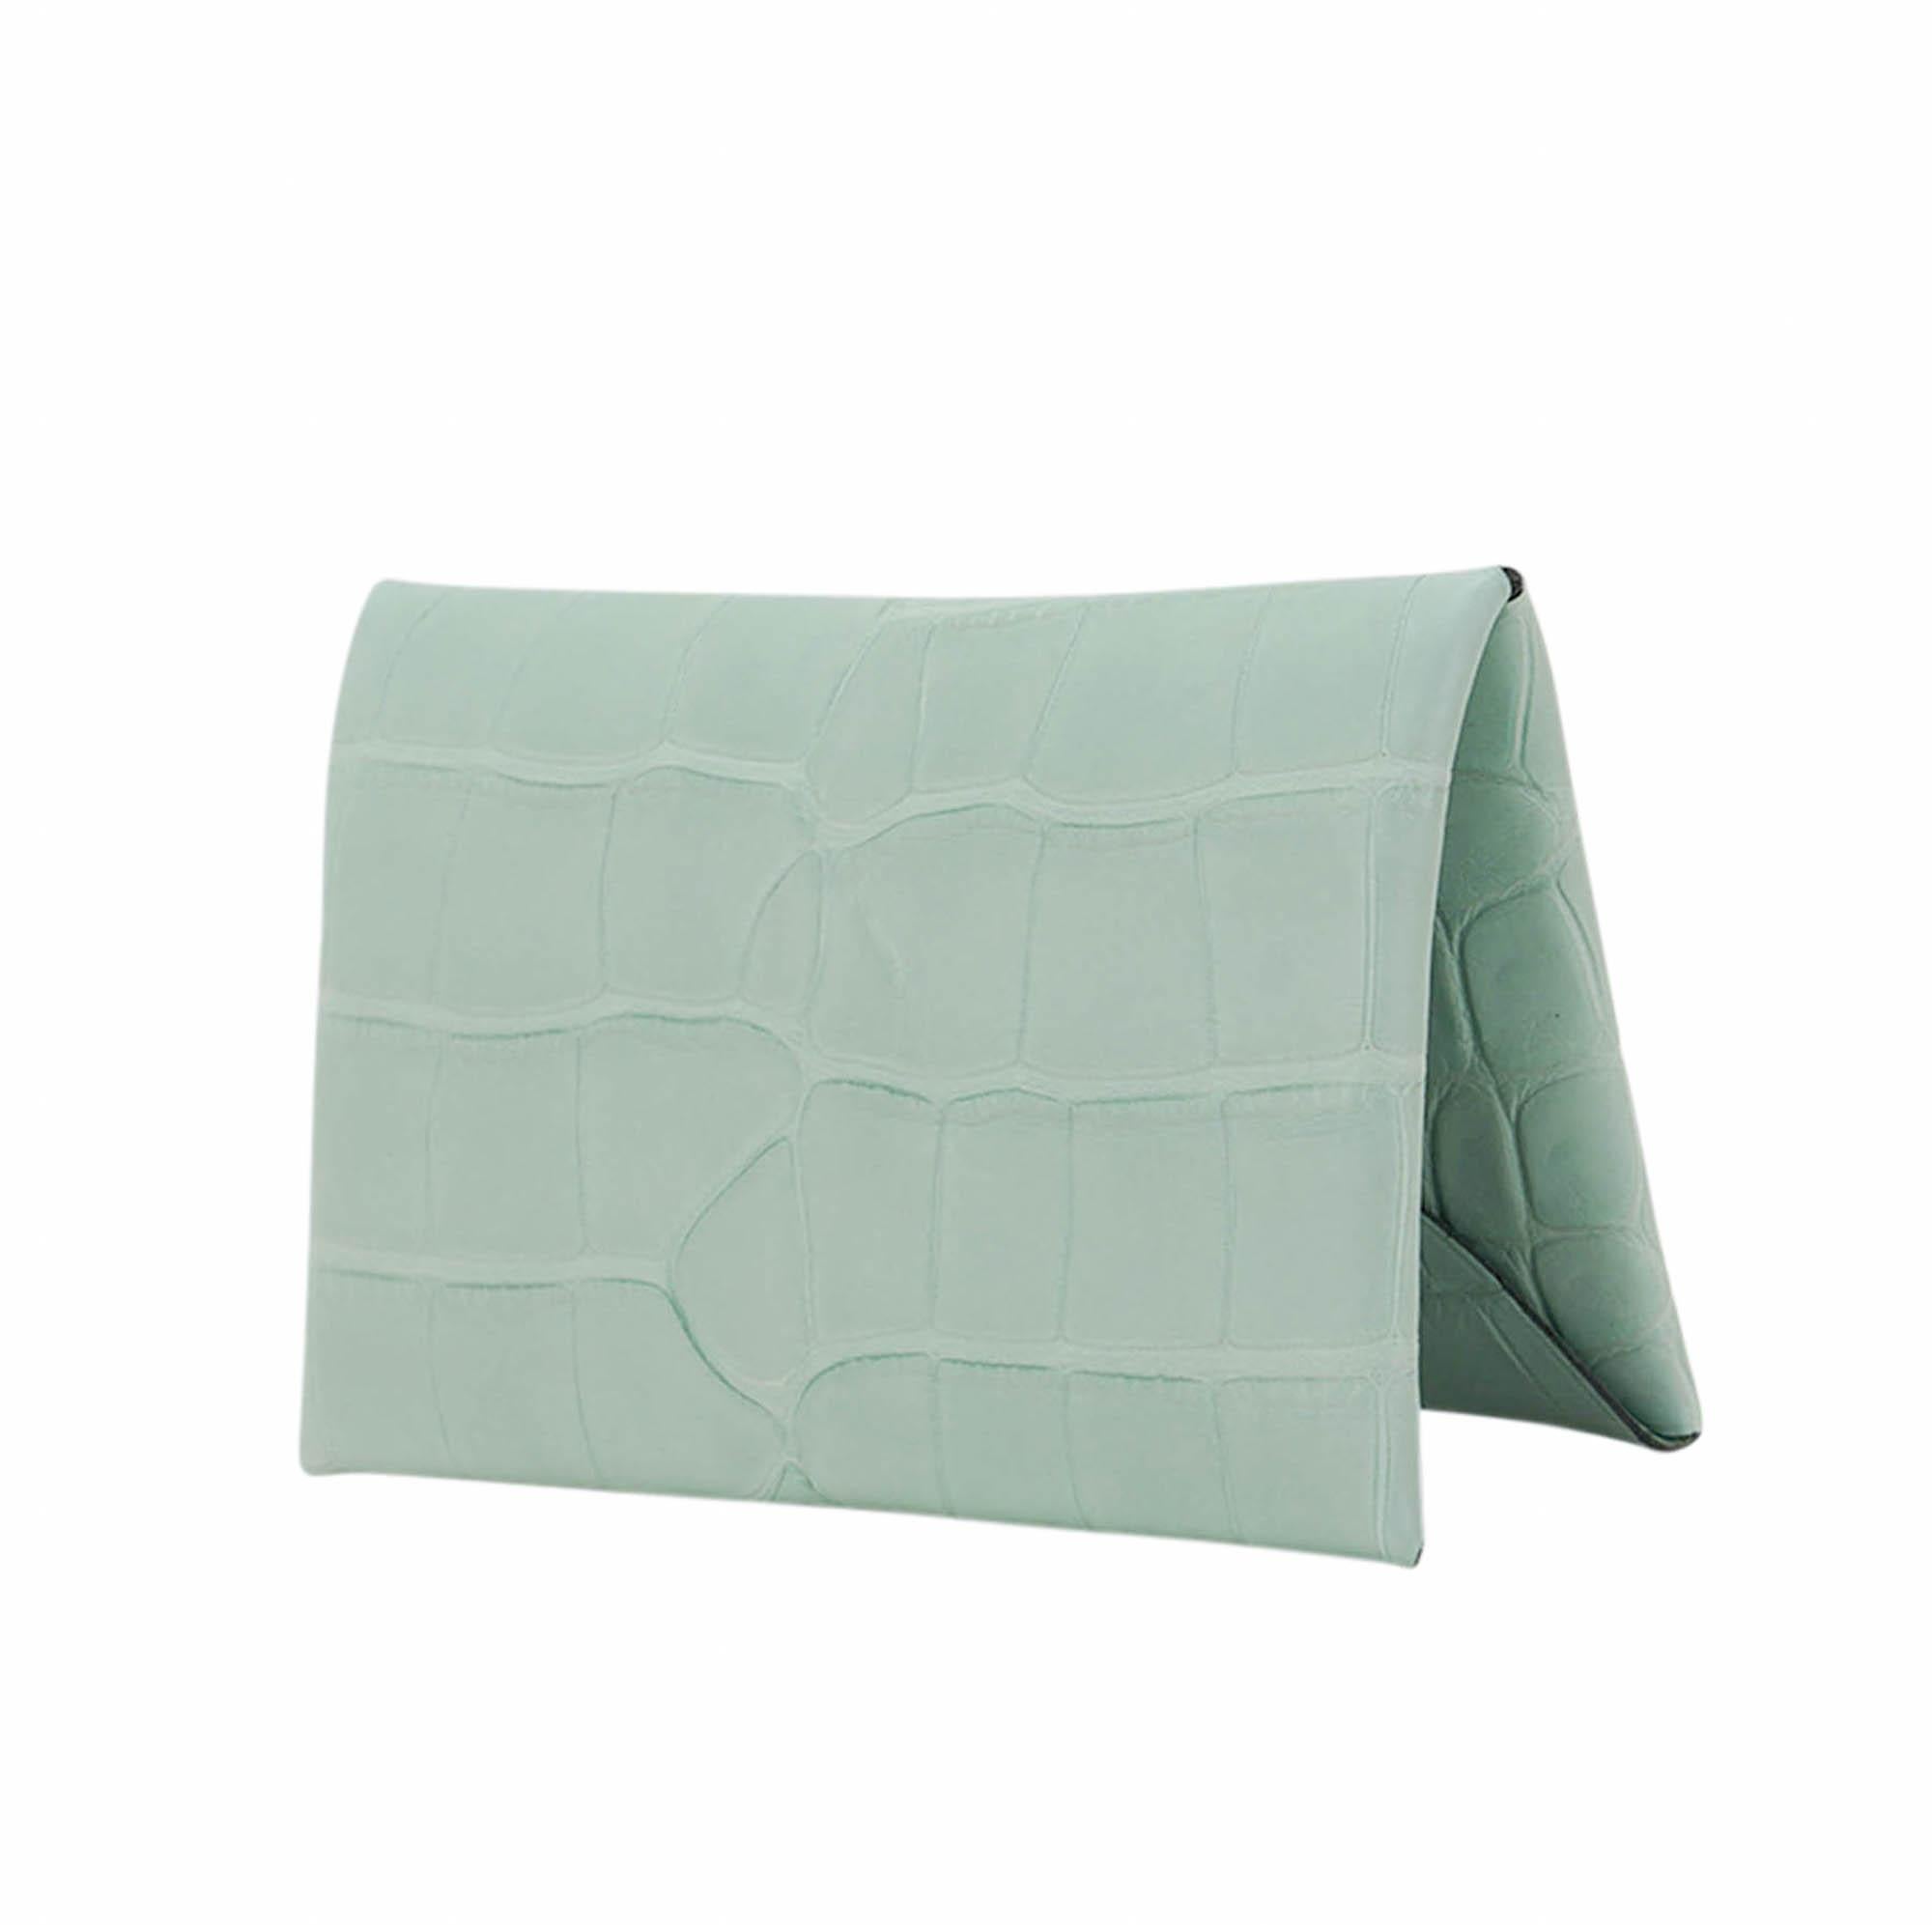 Mightychic offers an Hermes Calvi card holder featured in rare Vert D'Eau Matte Alligator.
Palladium snap closure.
The card holder has 2 slots for business / credit cards.
Comes with signature Hermes box.
New or Store Fresh Condition.
final